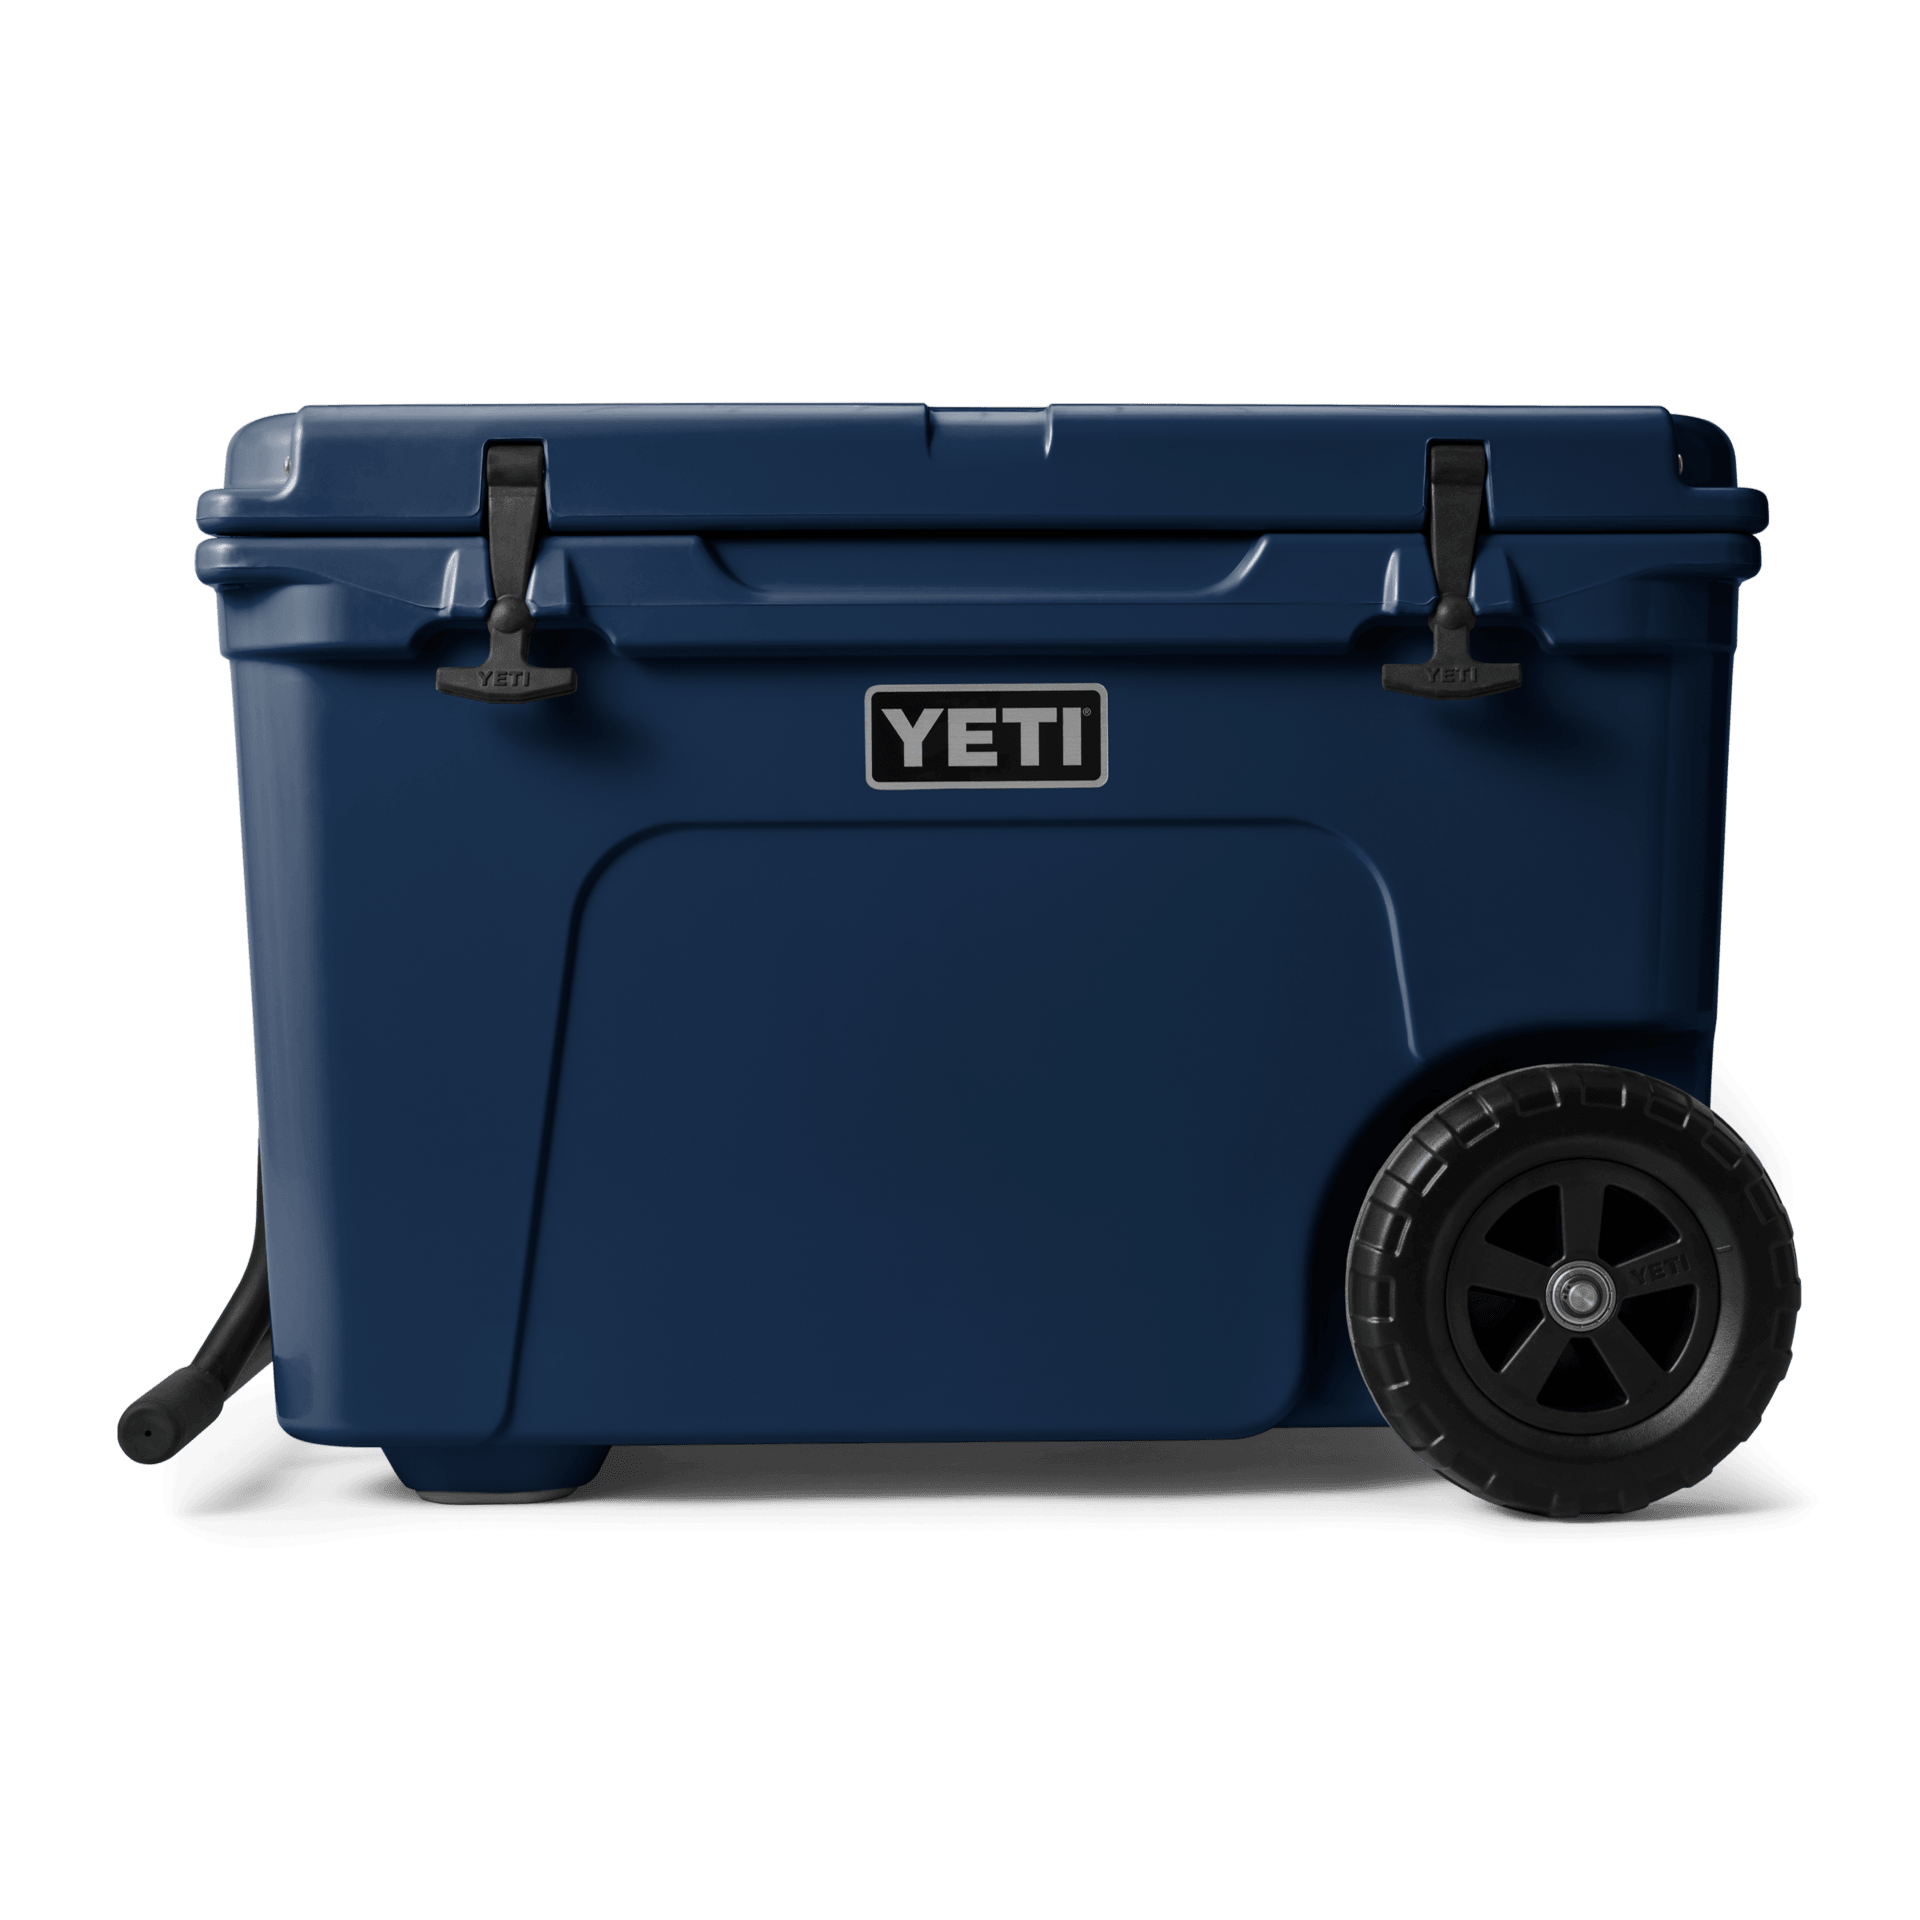 WHEELED COOLERS - Yeti Coolers